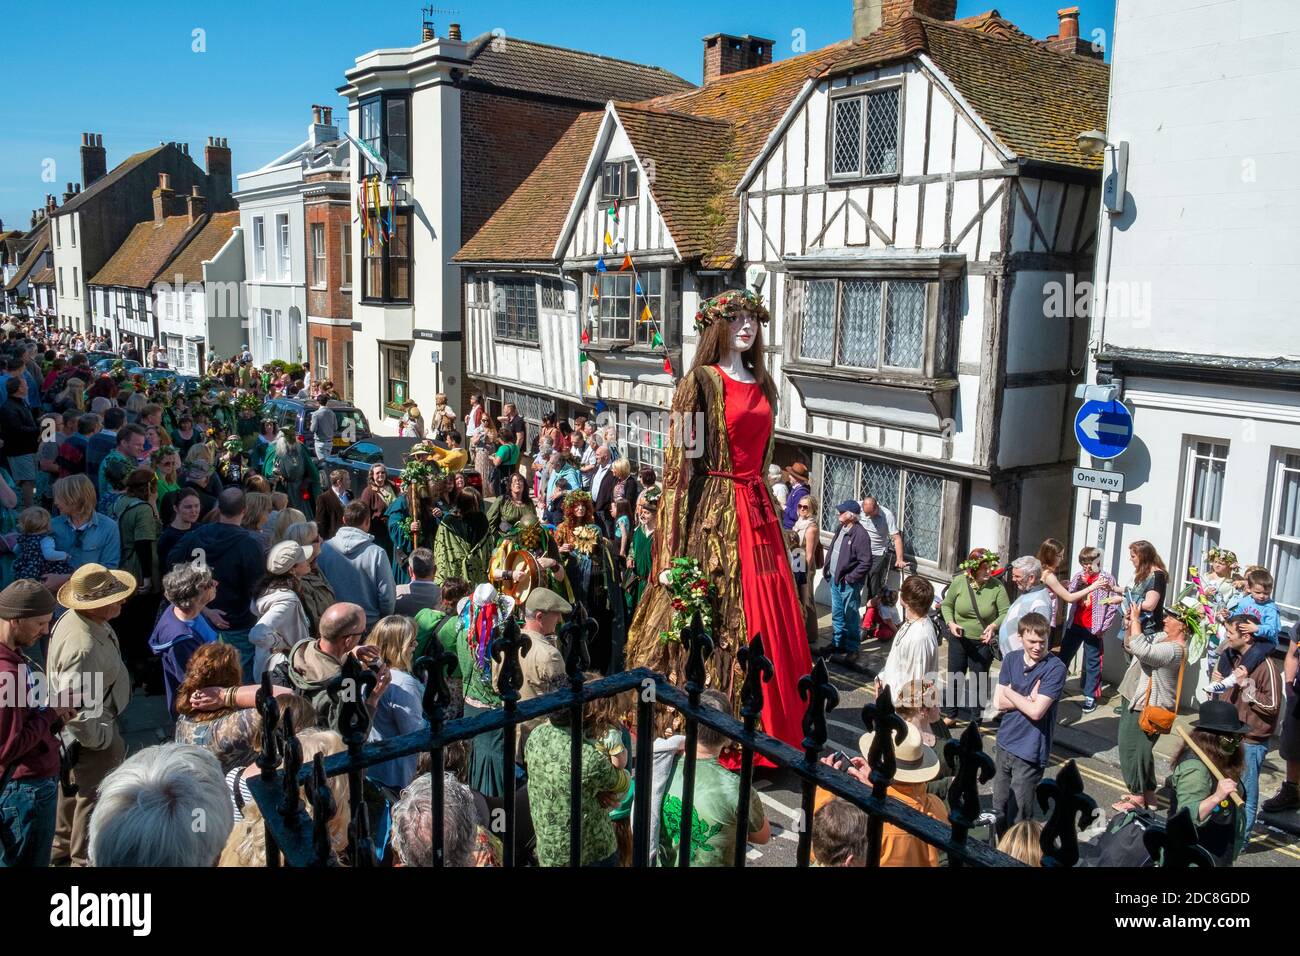 Hastings Old Town, Jack-in-the-Green, festival Green Man. Défilé traditionnel du 1er mai, East Sussex, Royaume-Uni. Foules bordant All Saints Street. Banque D'Images